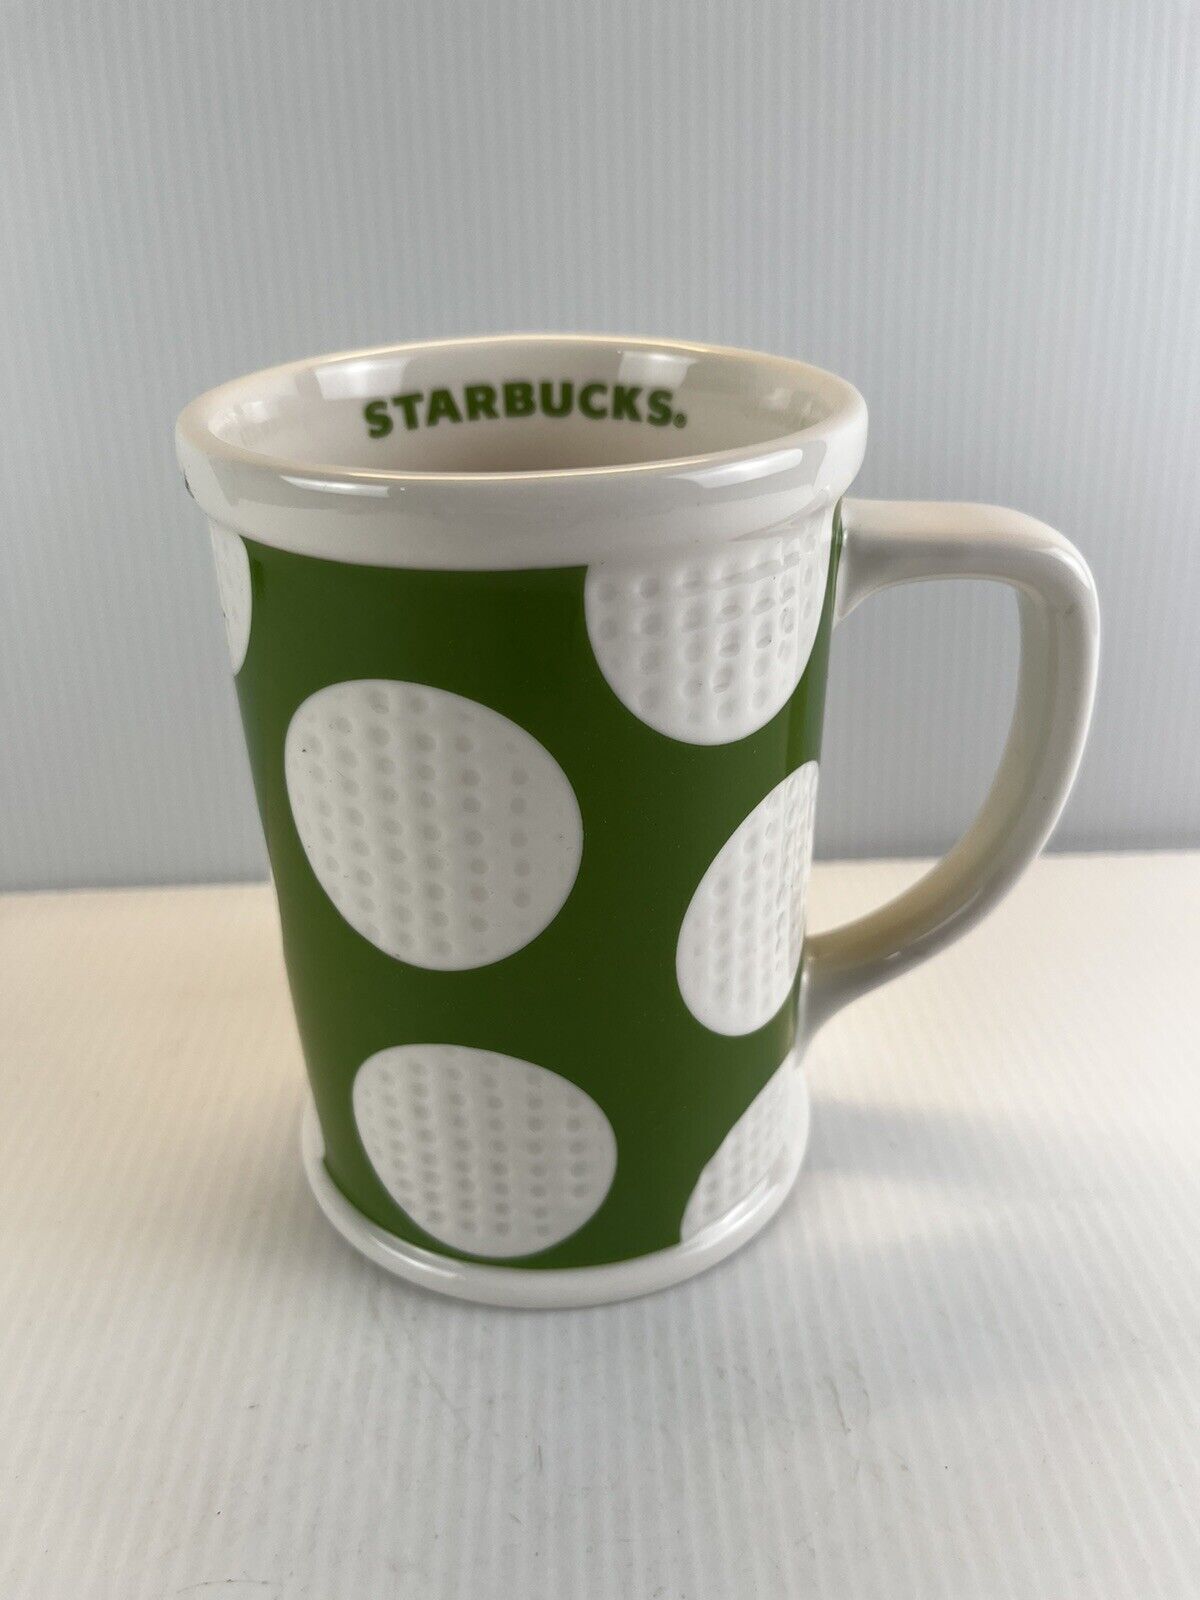 Starbucks Golf Mug Green White Coffee Cup Dimpled 2007 Large Dad Gift